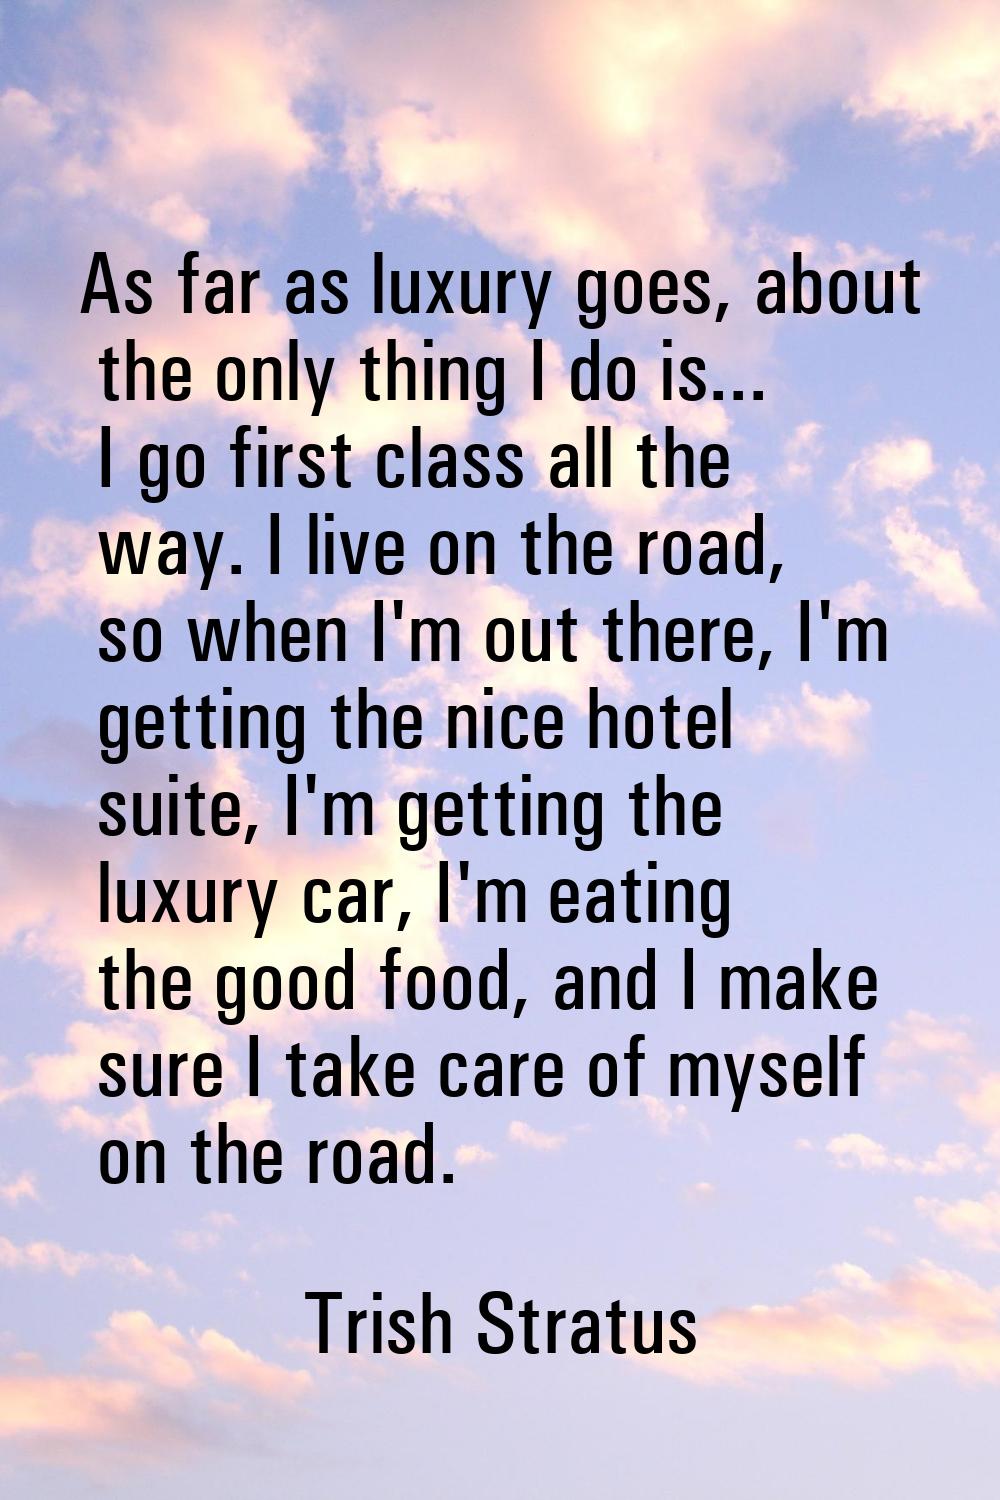 As far as luxury goes, about the only thing I do is... I go first class all the way. I live on the 